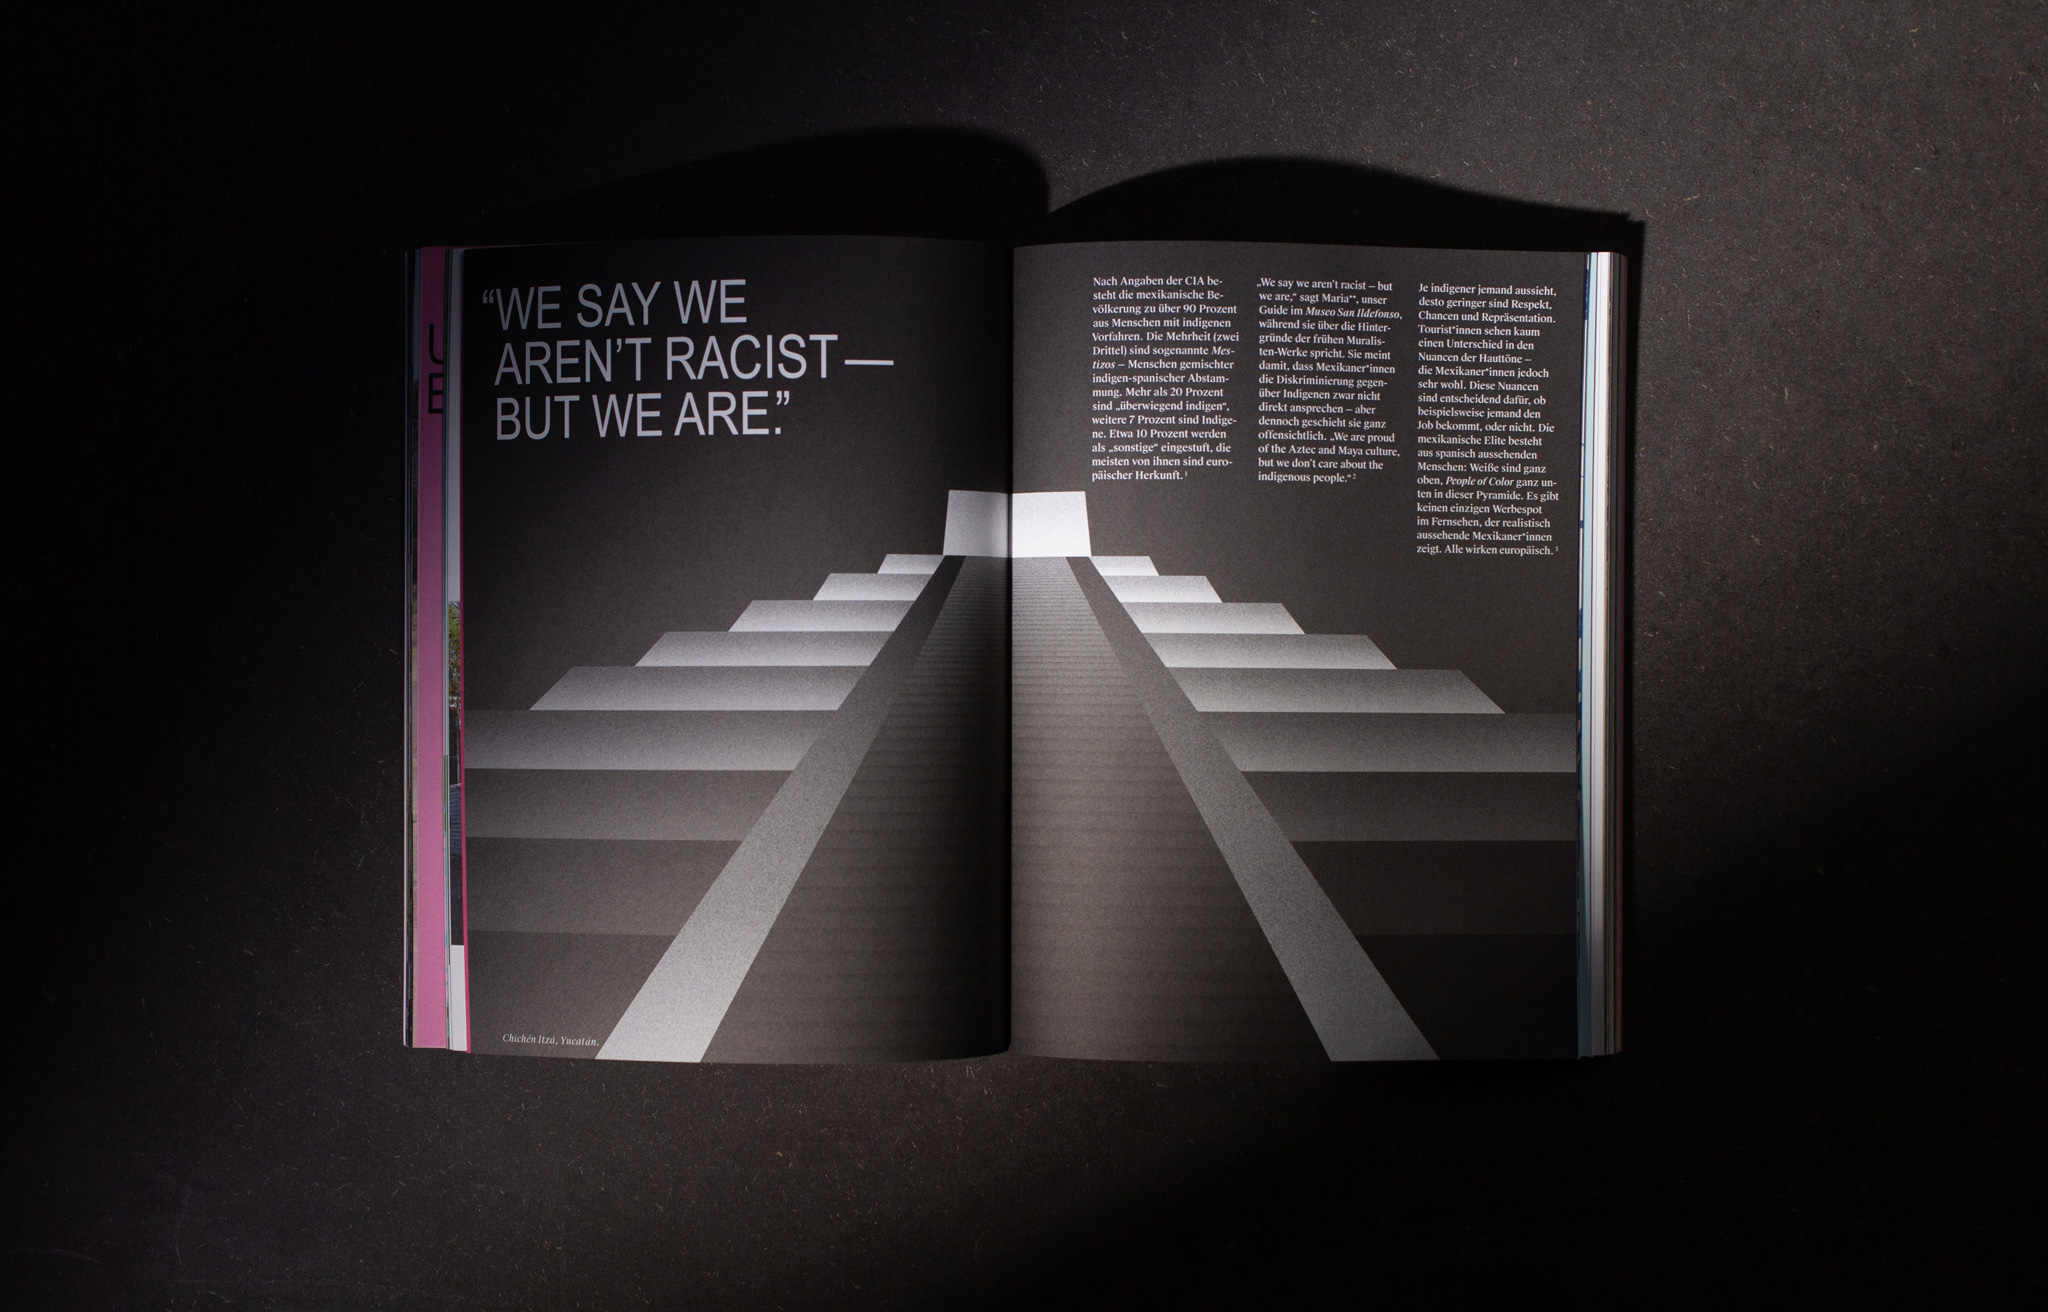 “We say we aren’t racist — but we are.“ — second spread